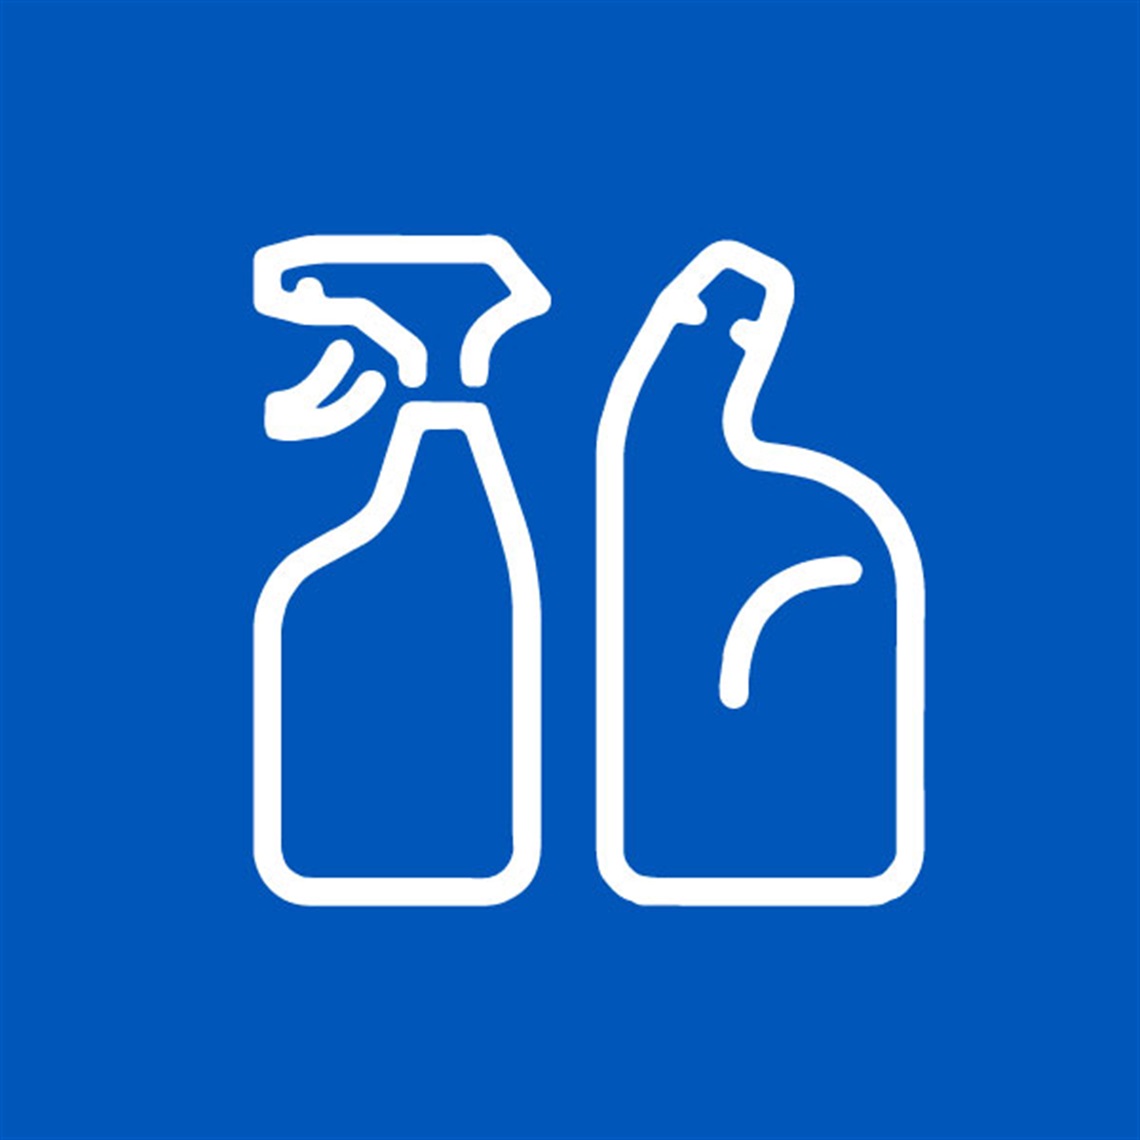 Hazardous waste cleaning products icon